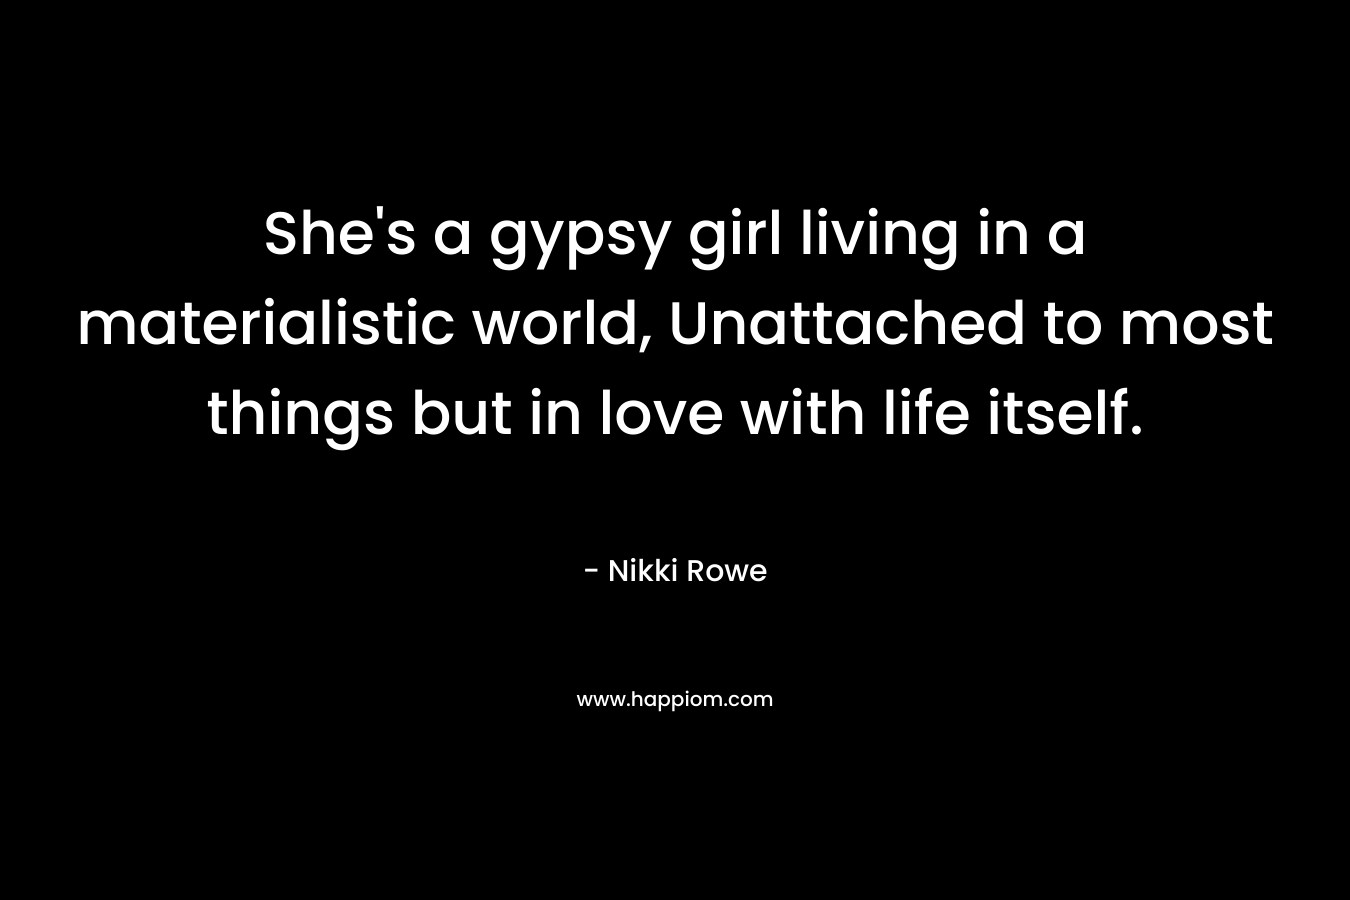 She's a gypsy girl living in a materialistic world, Unattached to most things but in love with life itself.